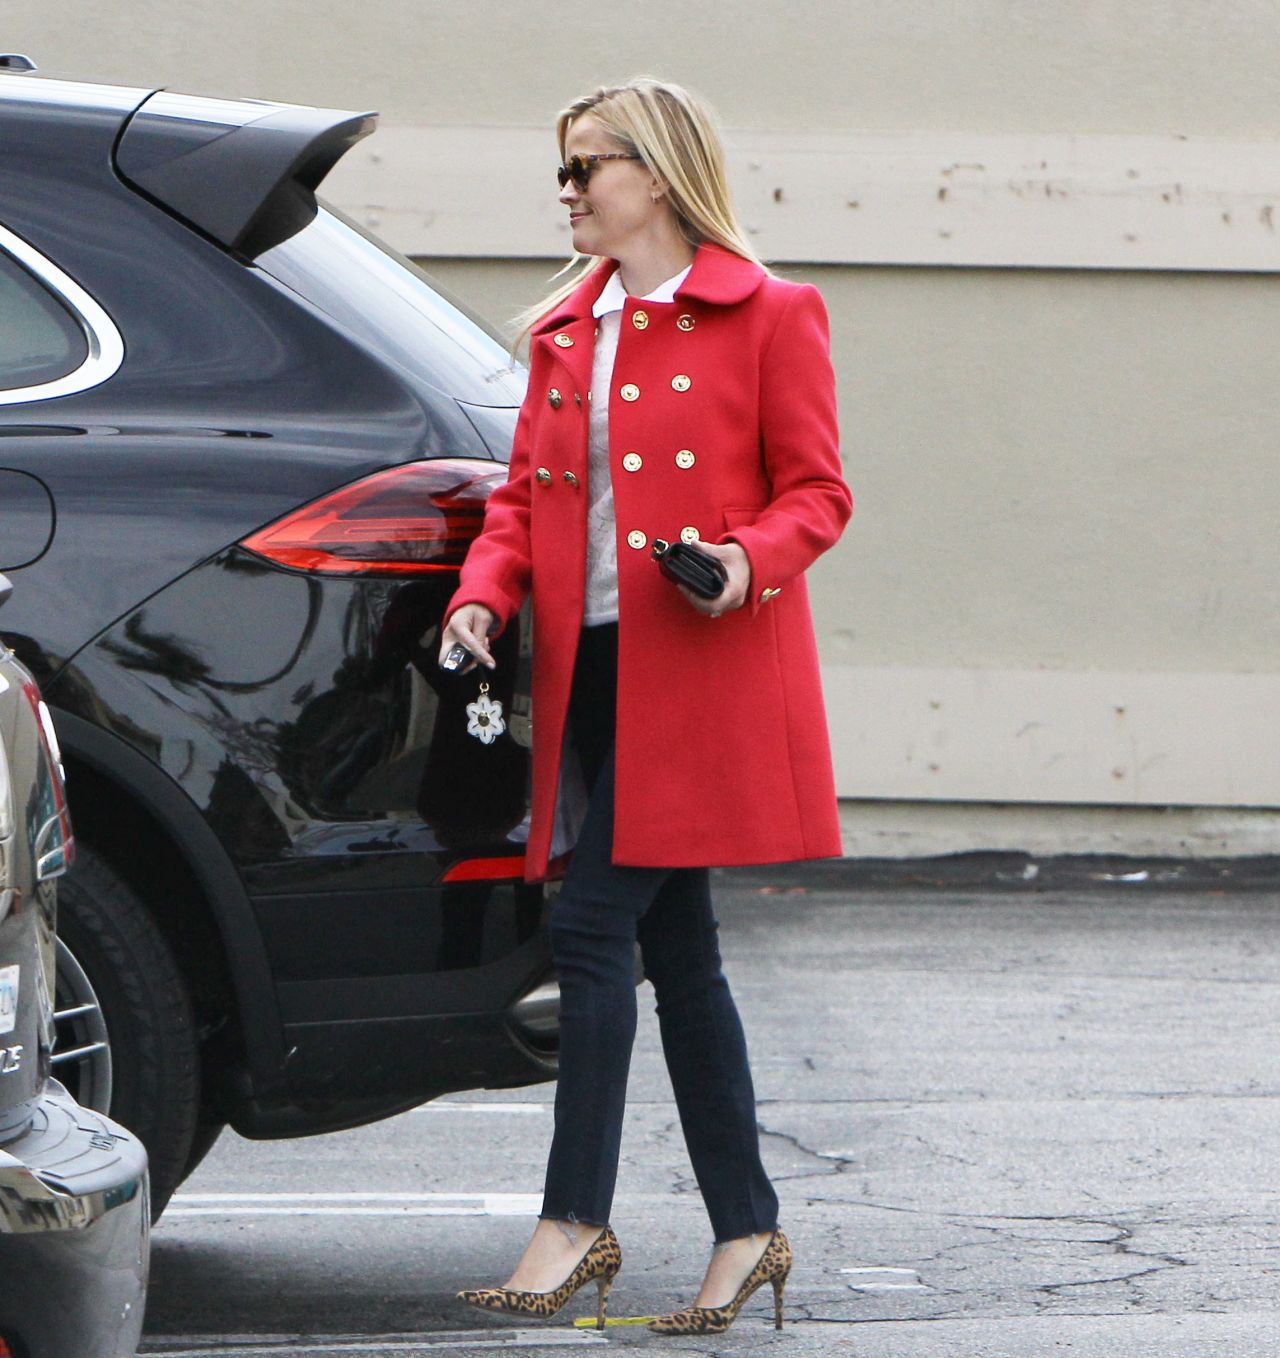 reese-witherspoon-style-out-in-brentwood-12-20-2015_10